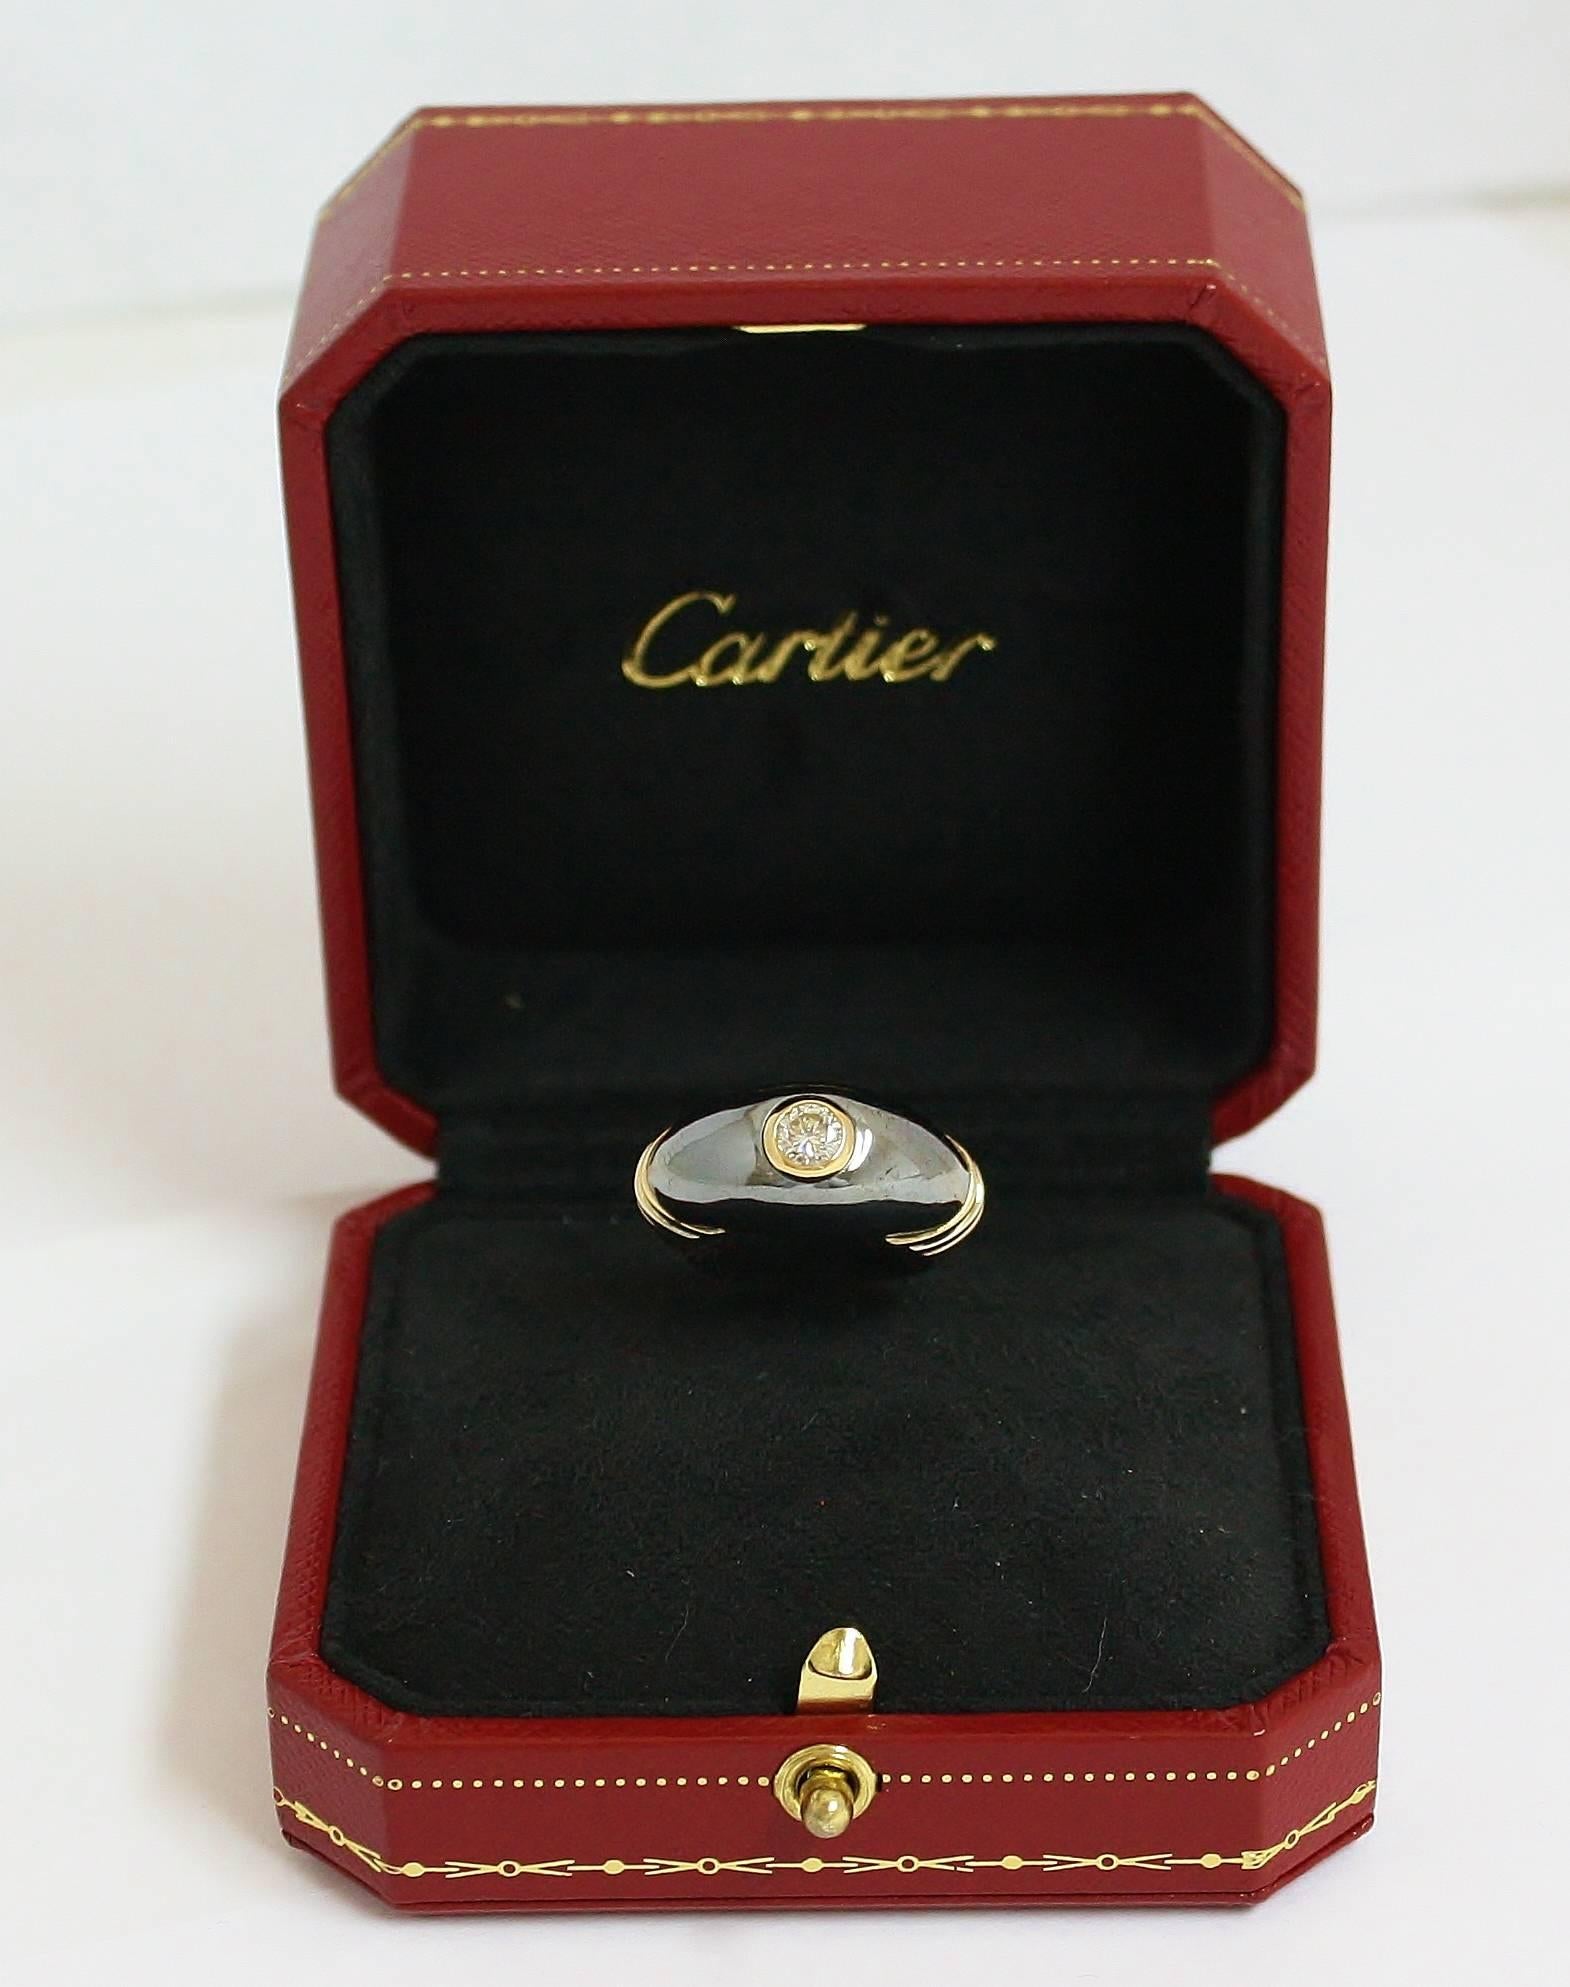 This vintage Cartier dome ring combines so much in one ring. The ring is cast in  18kt yellow gold with tricolor bands on each side of the silverium dome center. Silverium is a custom silver alloy trademarked by Cartier that gives the metal a